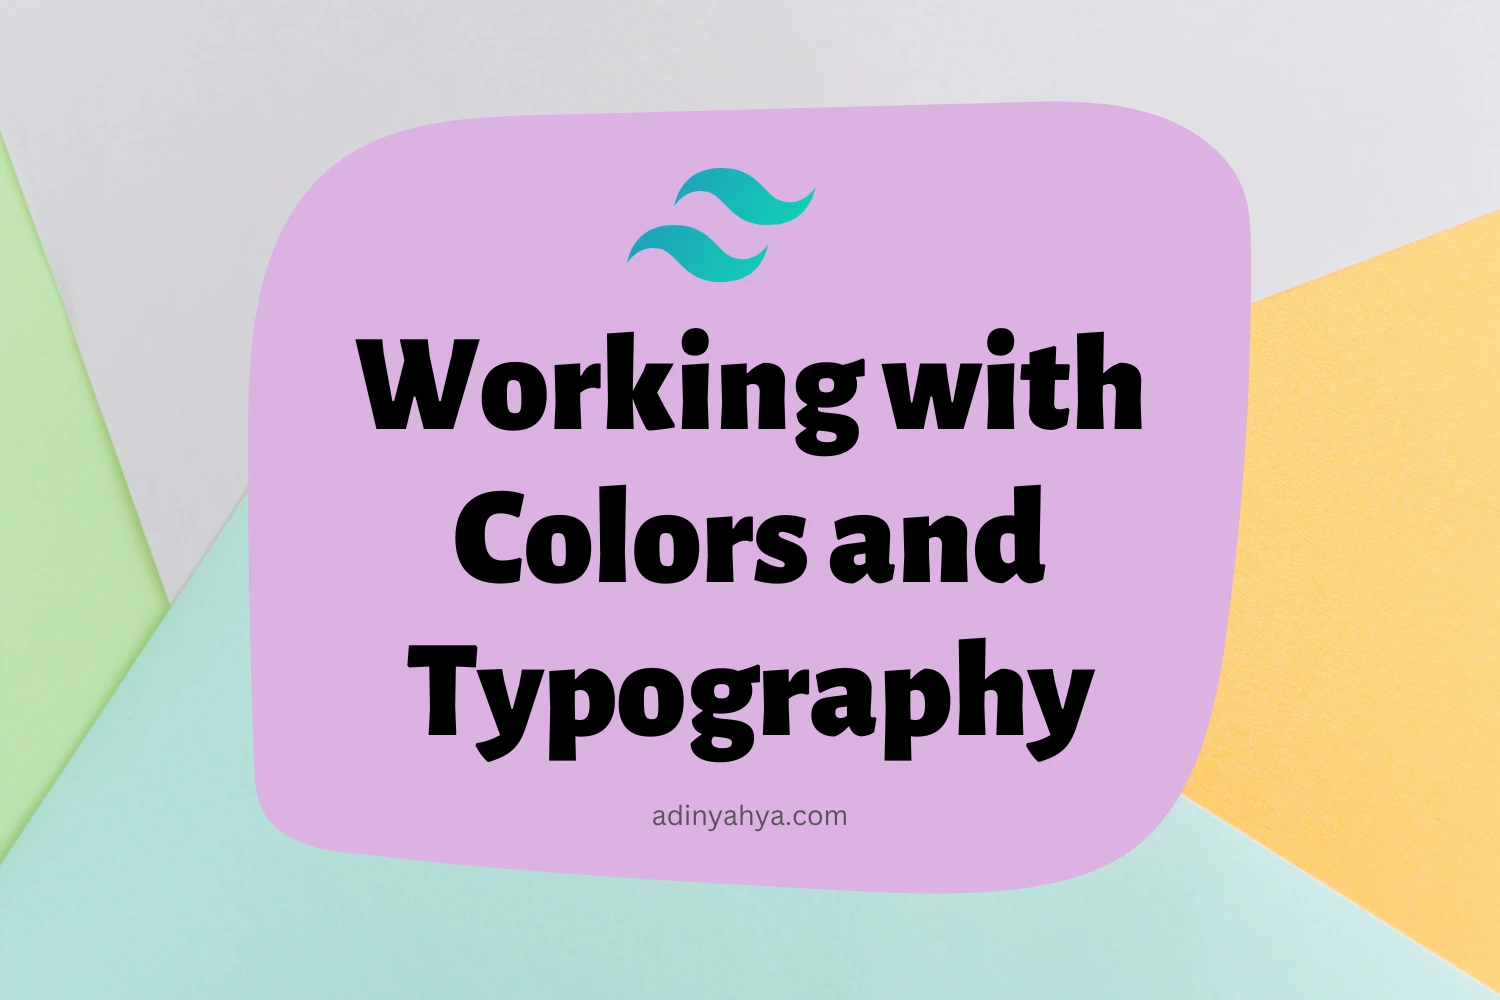 Working with Colors and Typography